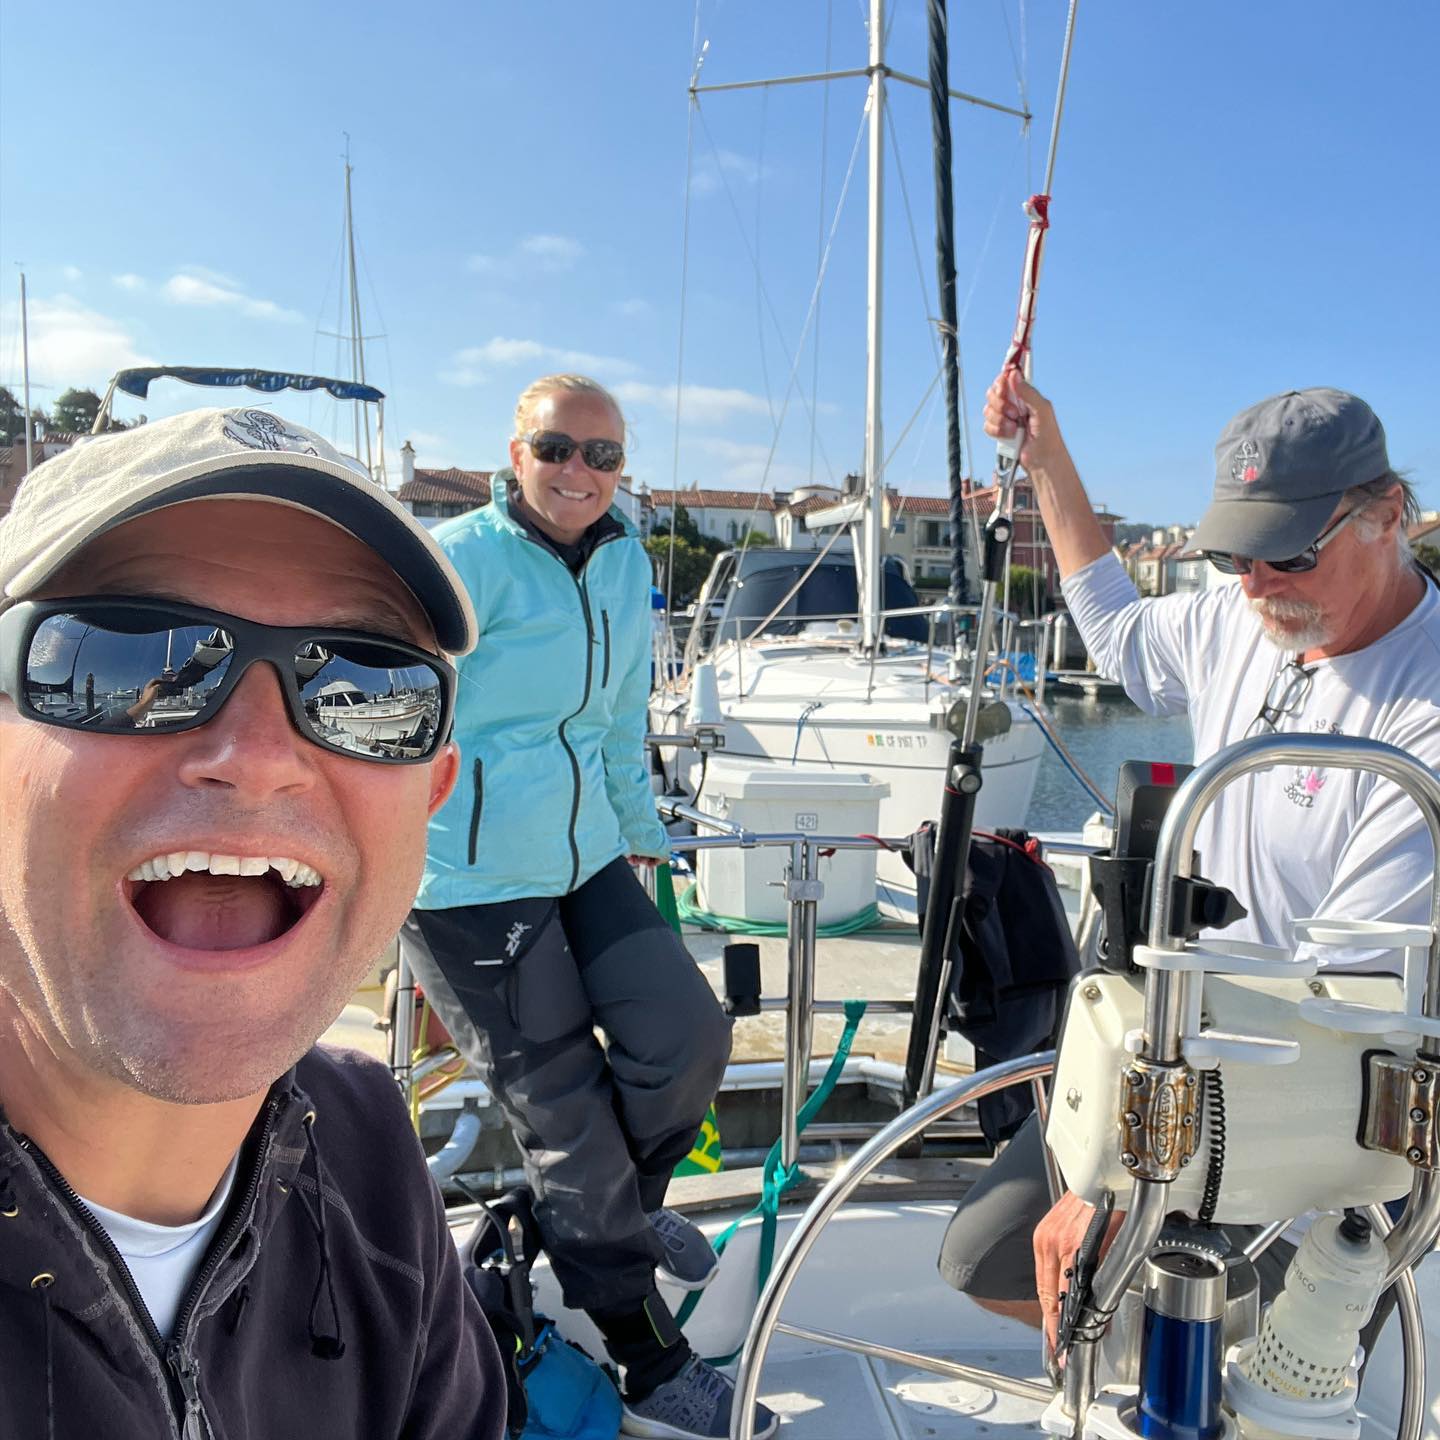 2022 Rolex Big Boat on Cal 39 Sea Star day 2: got a 5th and a 3rd yesterday